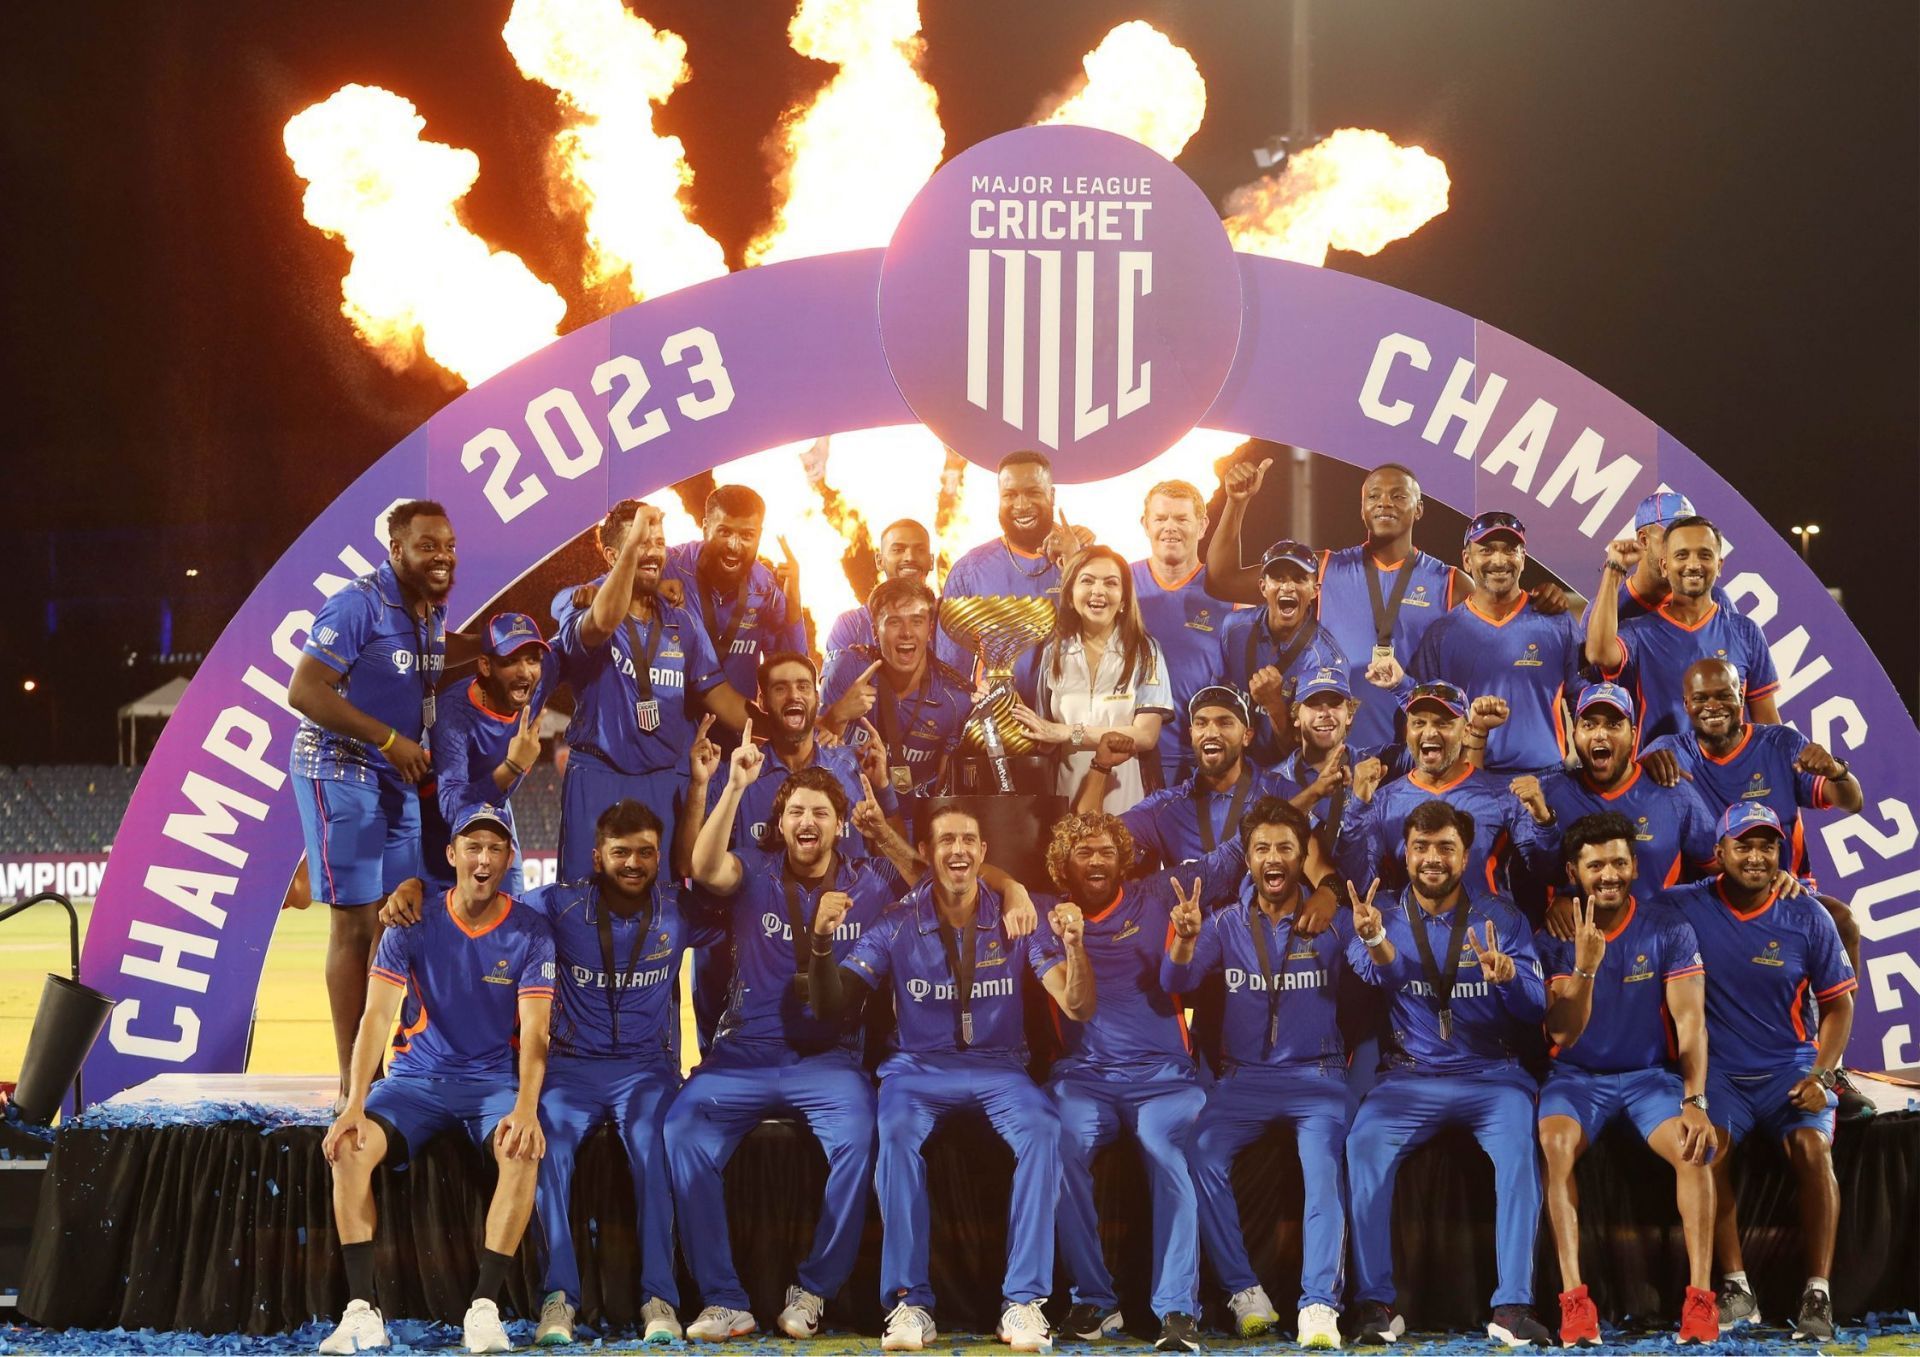 MI New York were crowned champions of the inaugural Major League Cricket season (Picture Credits: Twitter/Major League Cricket).